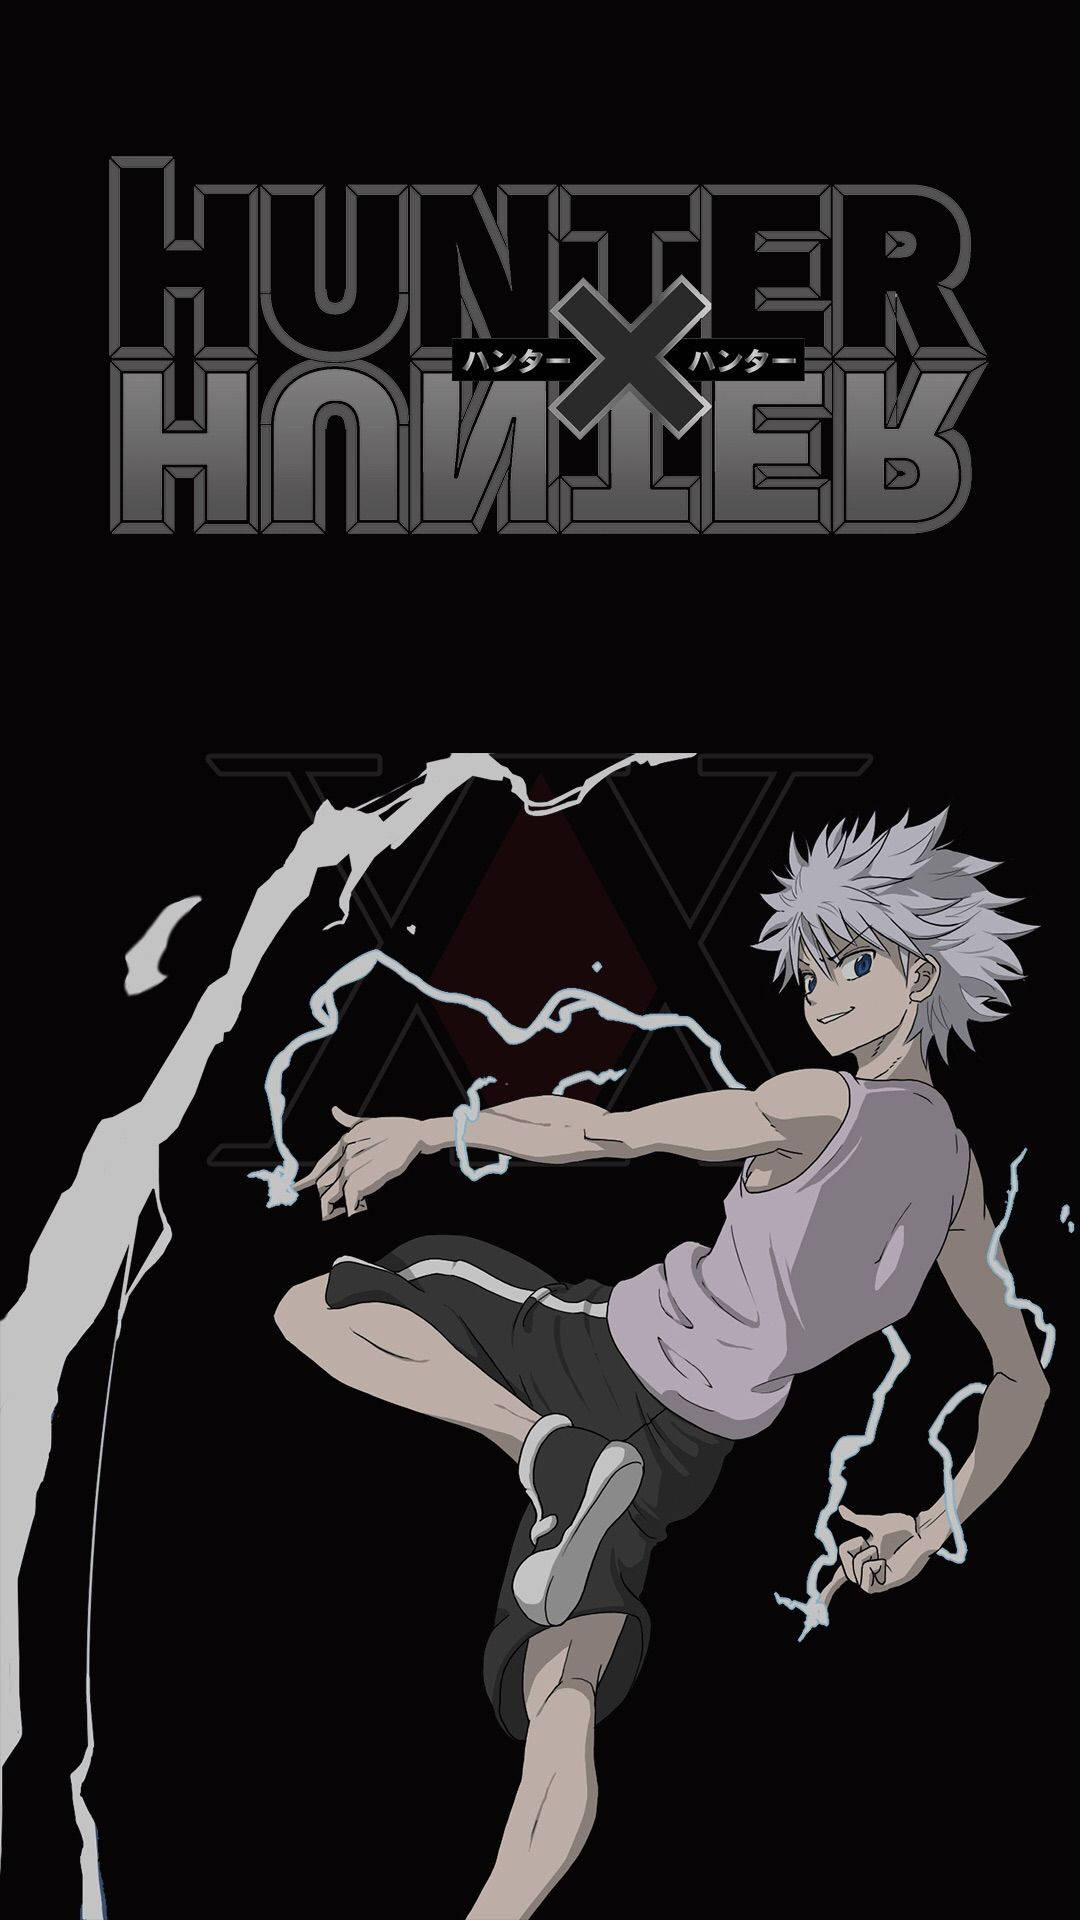 Download Unlock Your Imagination with the Hunter X Hunter iPhone Wallpaper